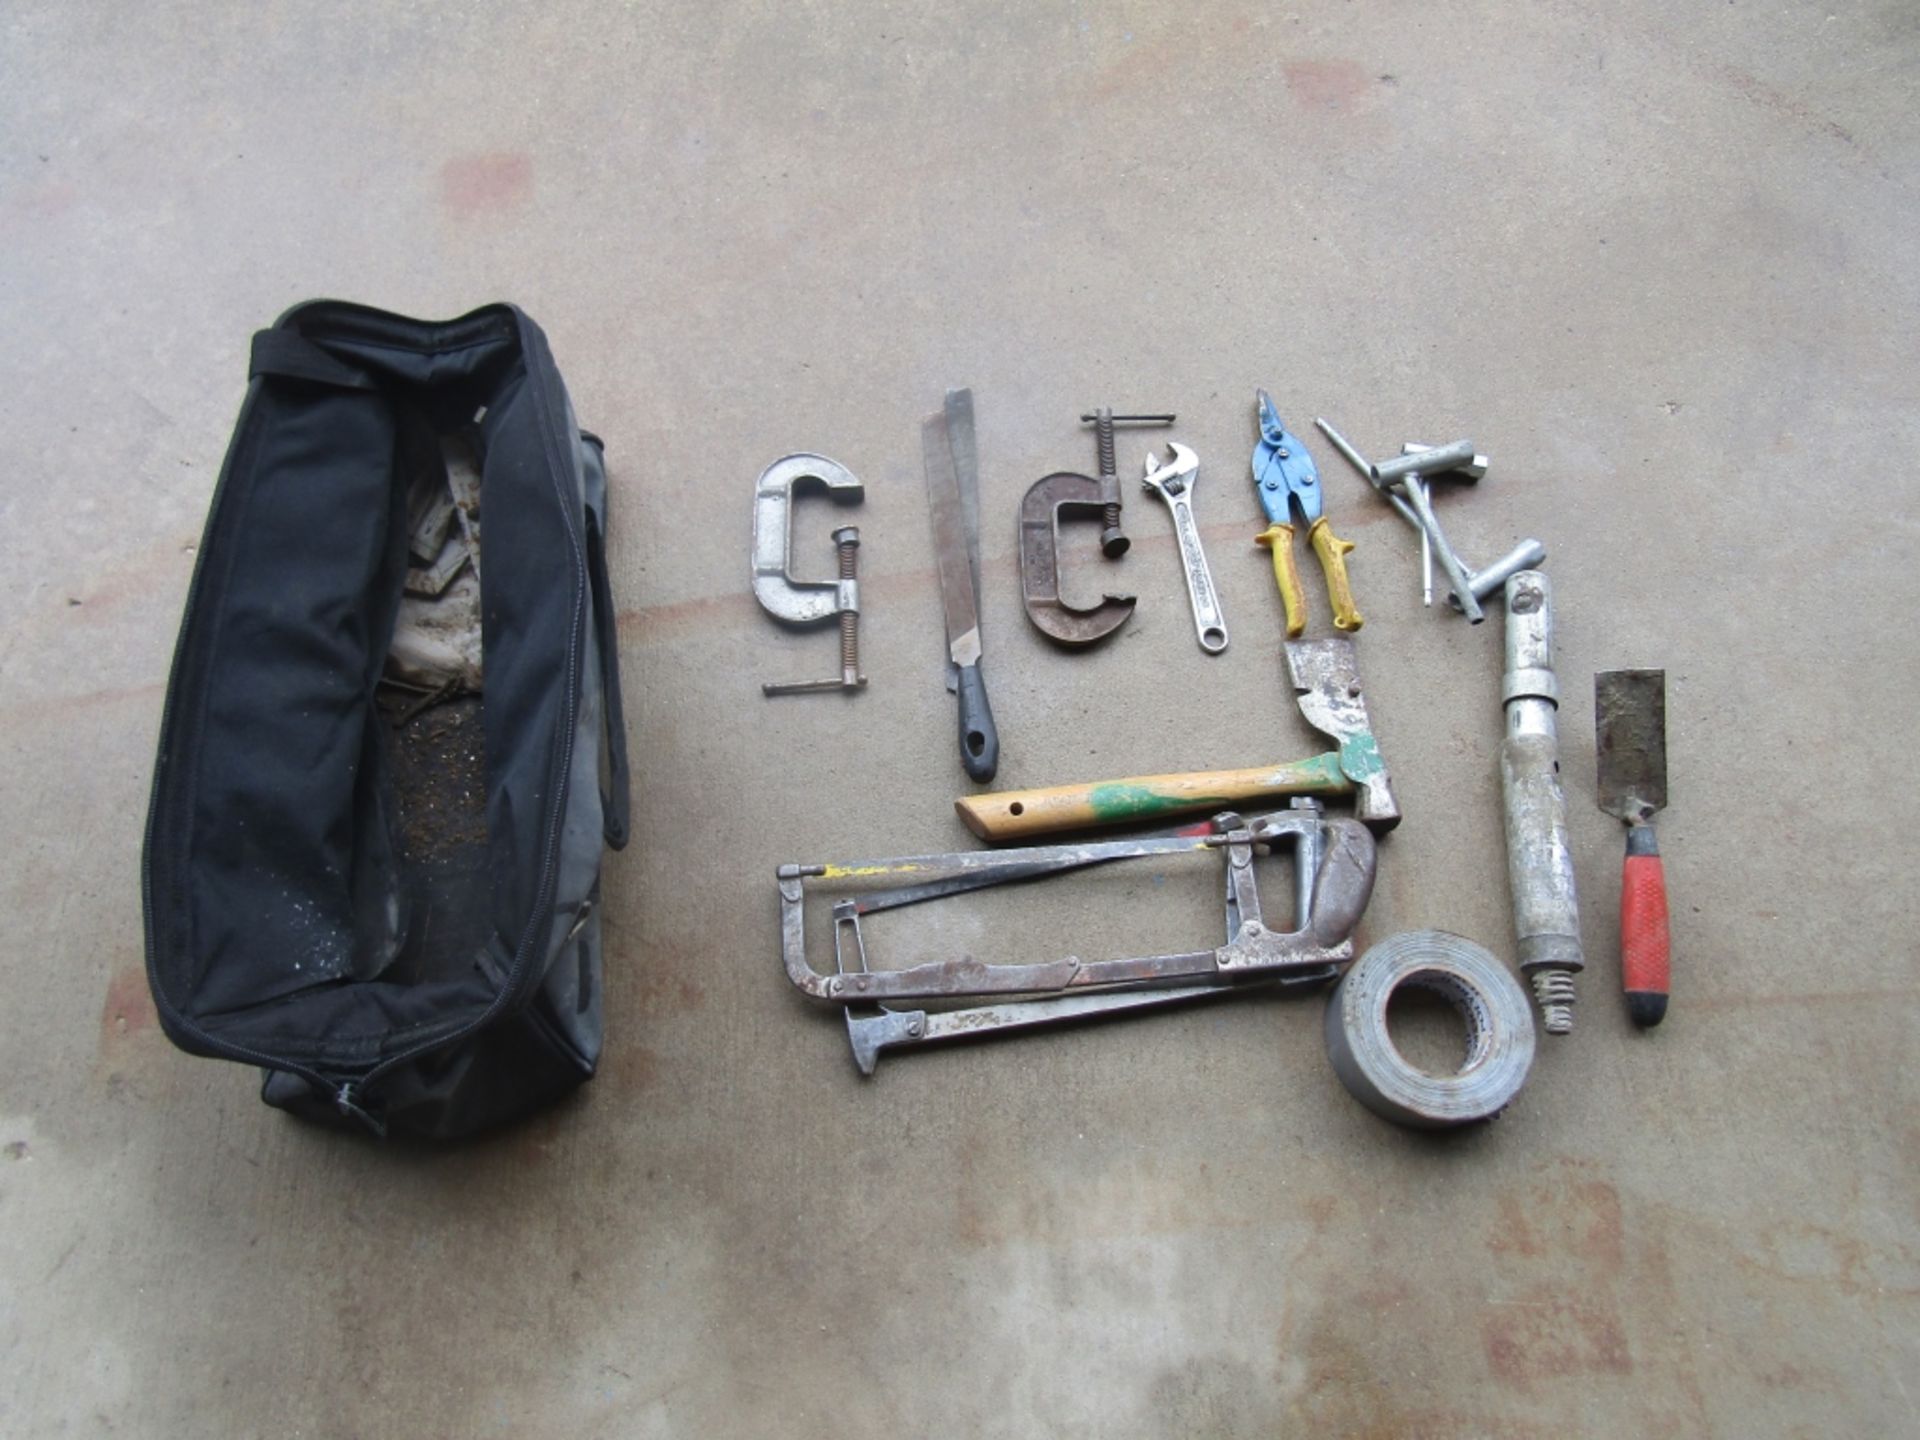 Bag of Miscellaneous Tools, C Clamps, Axe, Wrench, Files, Hand Saw, Etc.,